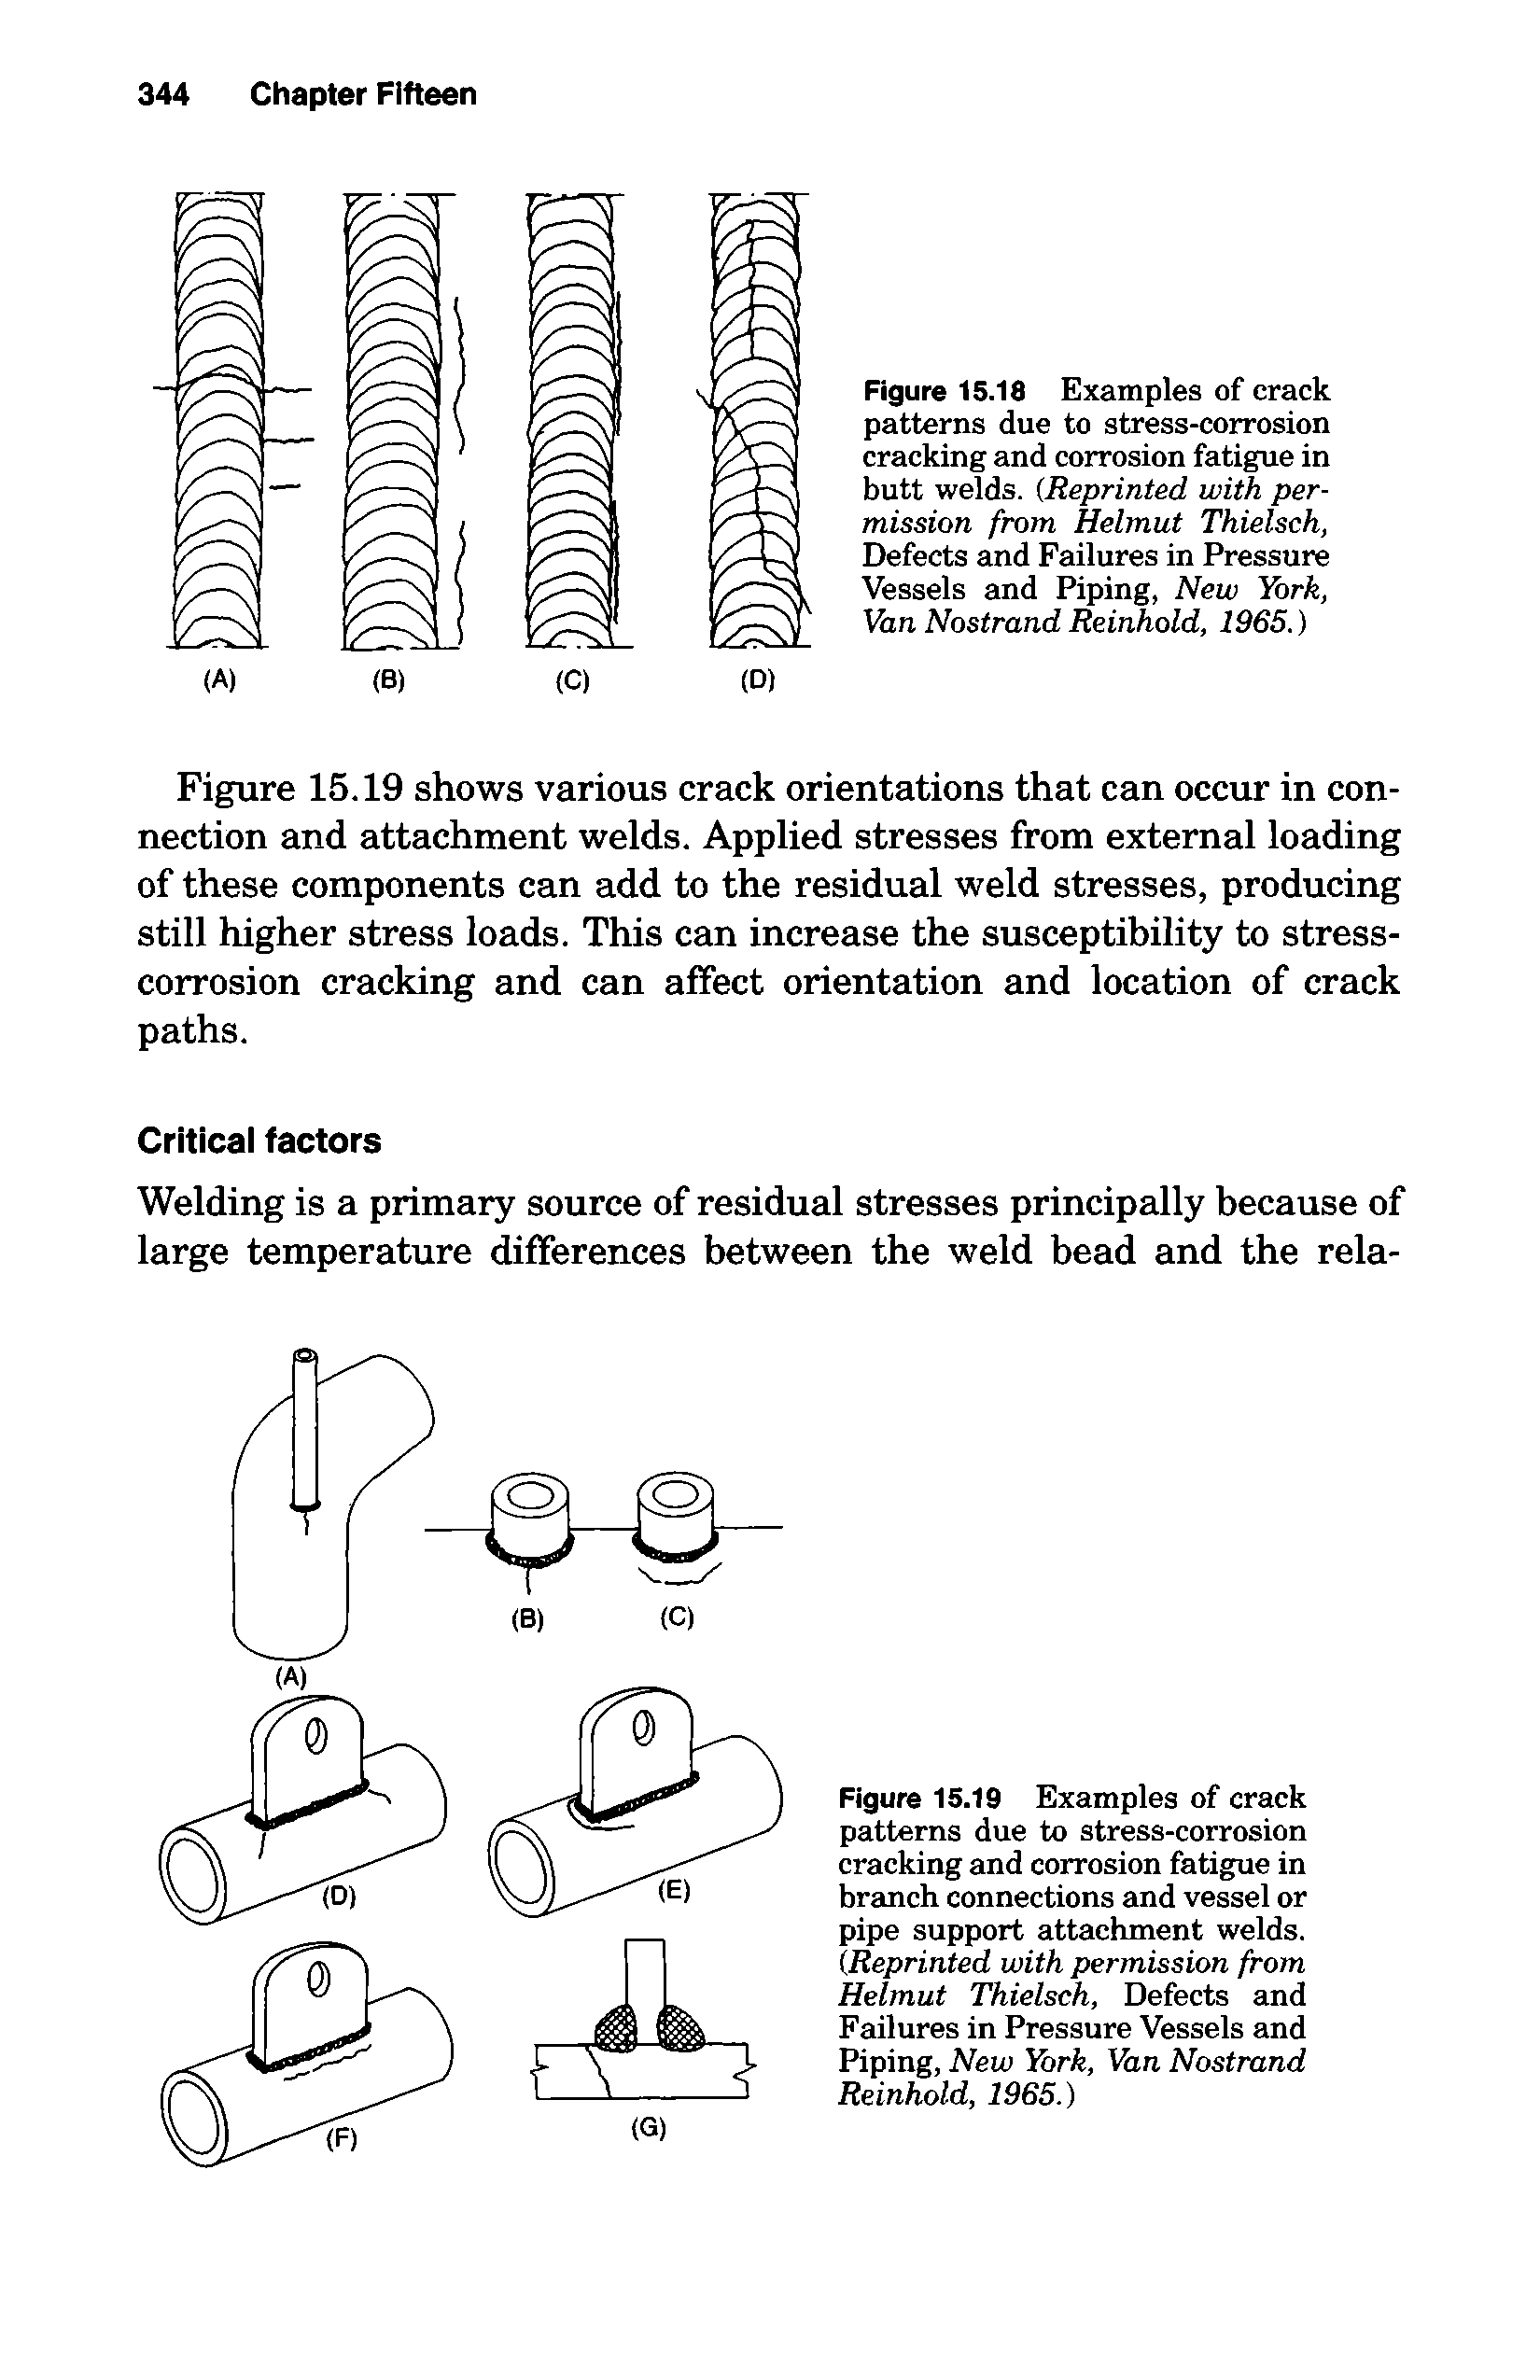 Figure 15.18 Examples of crack patterns due to stress-corrosion cracking and corrosion fatigue in butt welds. (Reprinted with permission from Helmut Thielsch, Defects and Failures in Pressure Vessels and Piping, New York, Van Nostrand Reinhold, 1965.)...